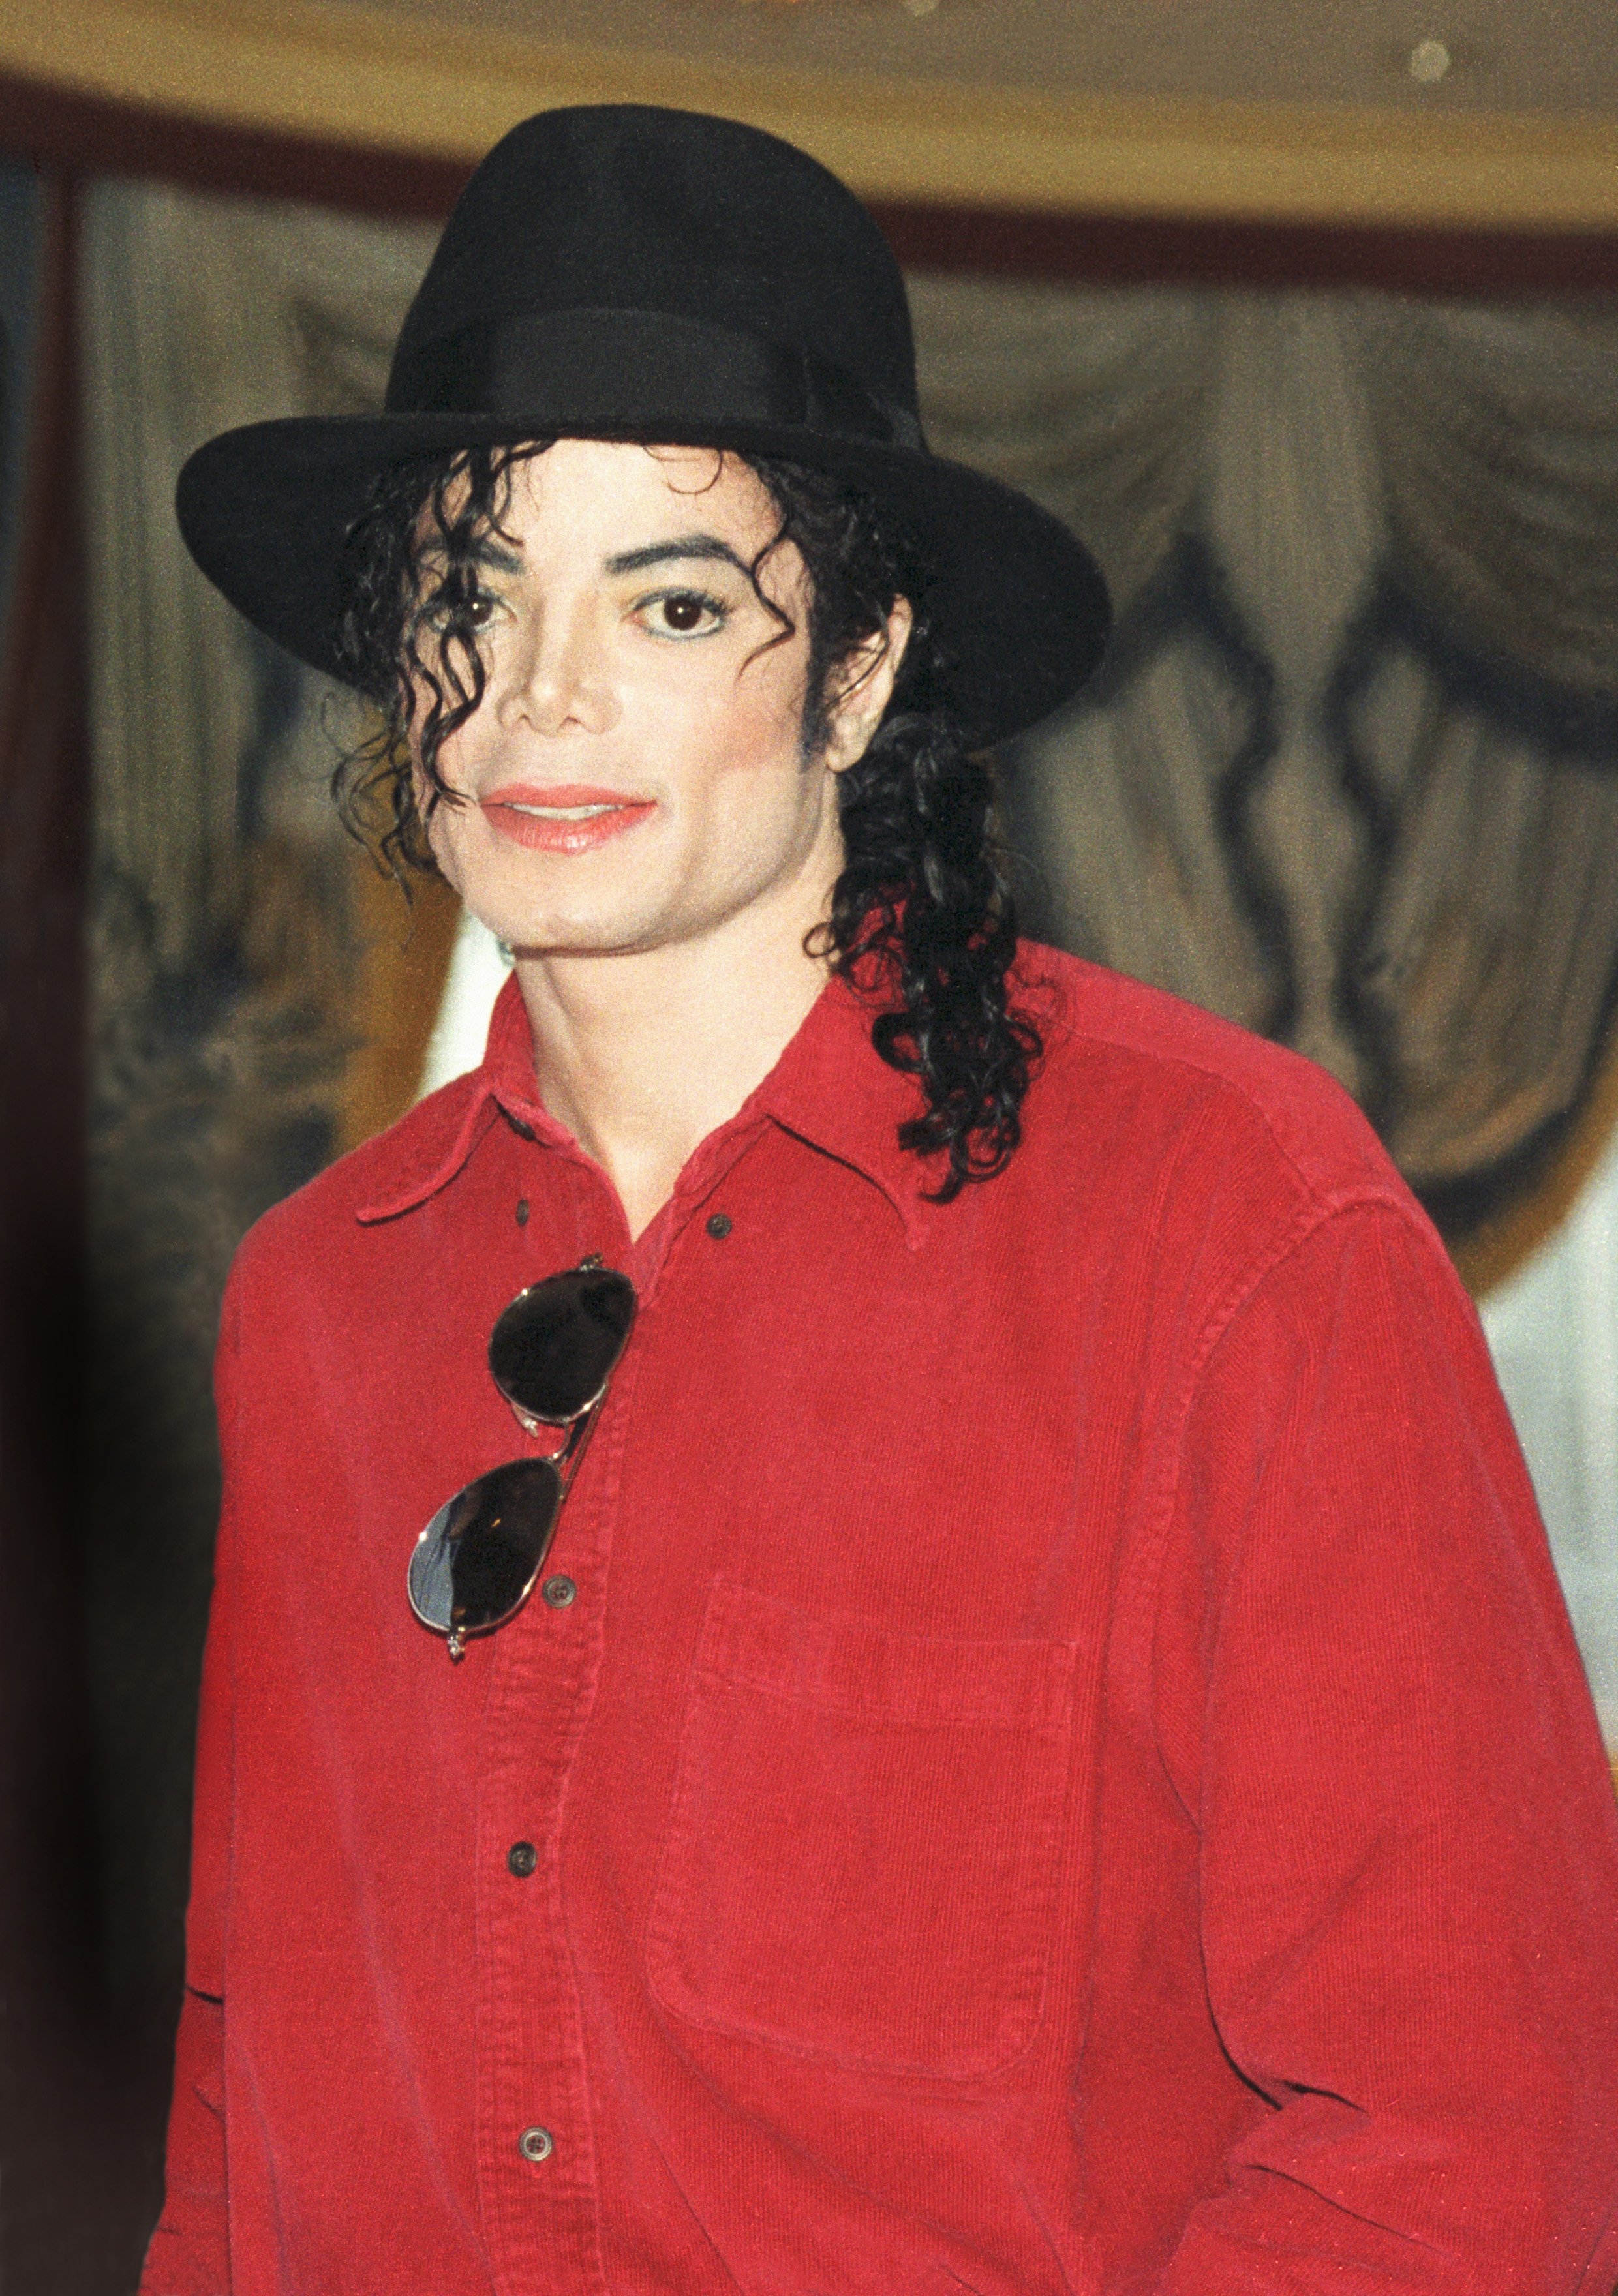 Michael Jackson's Personal Assistant Once Recalled Events from the Day